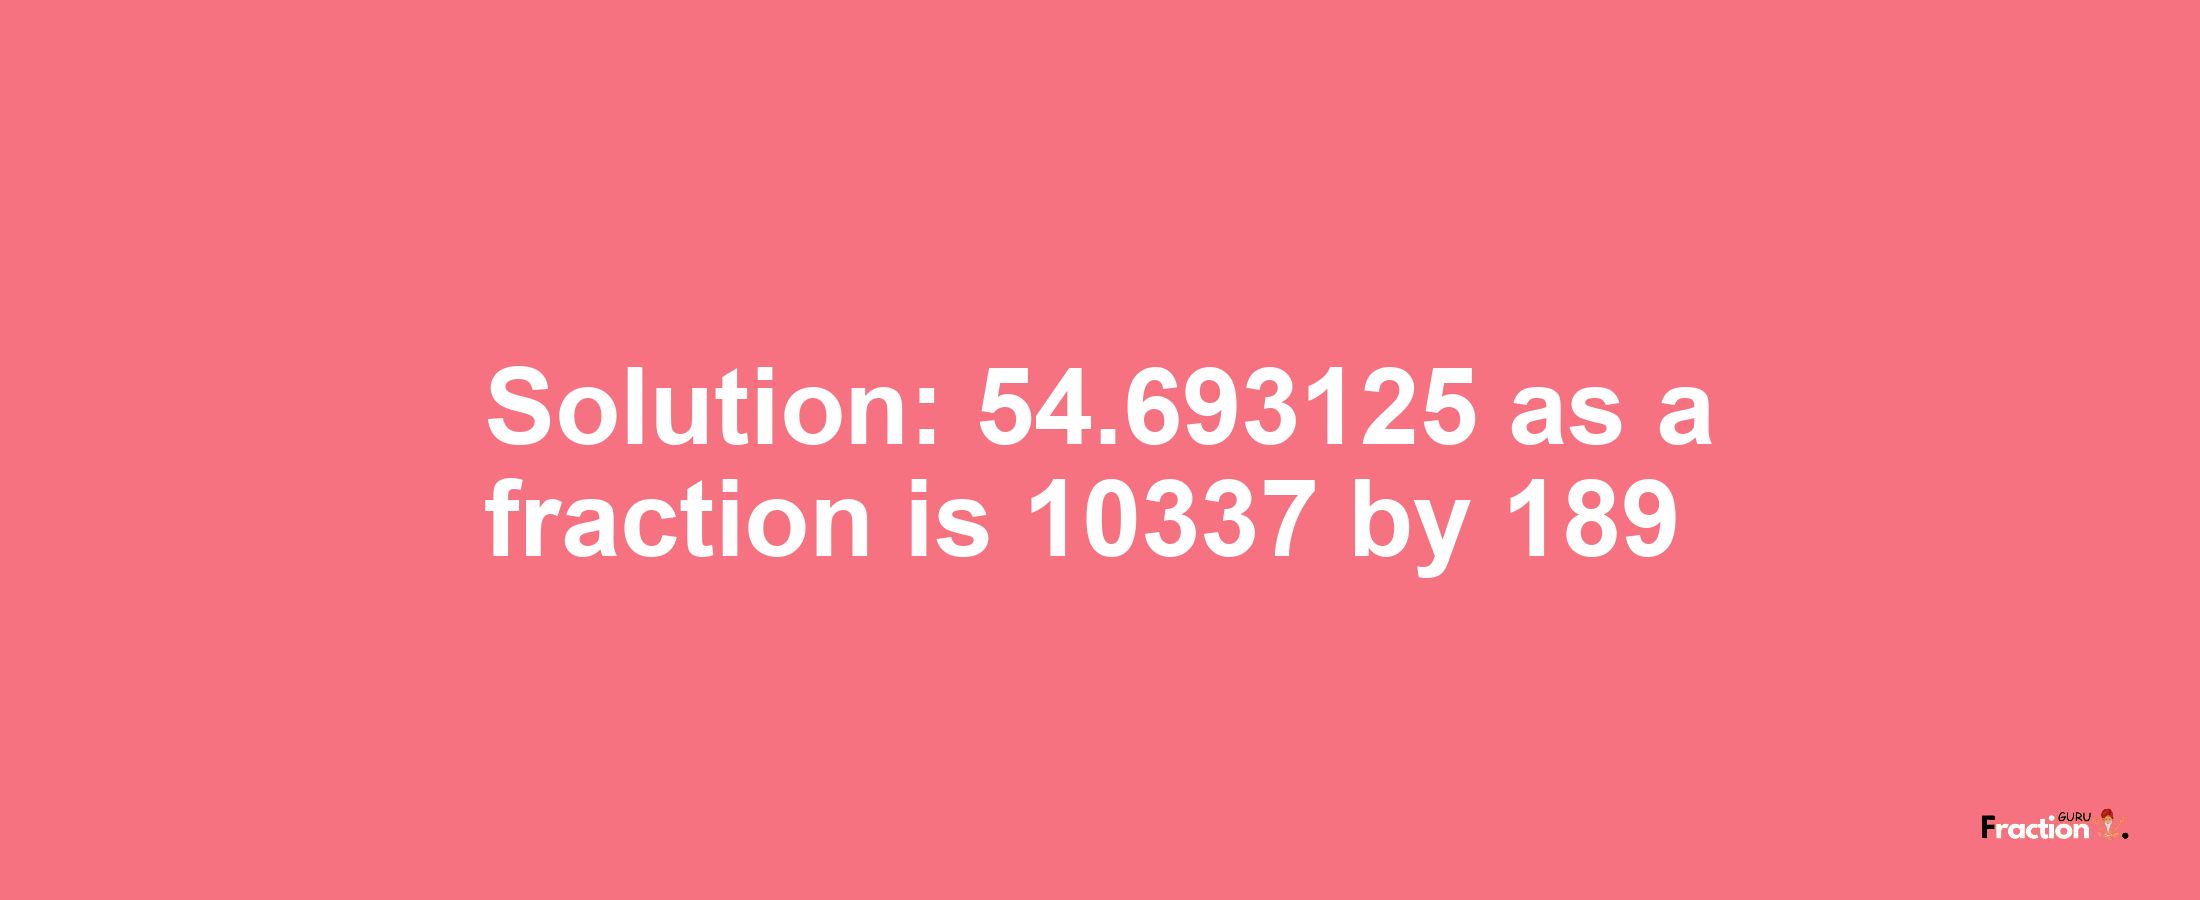 Solution:54.693125 as a fraction is 10337/189